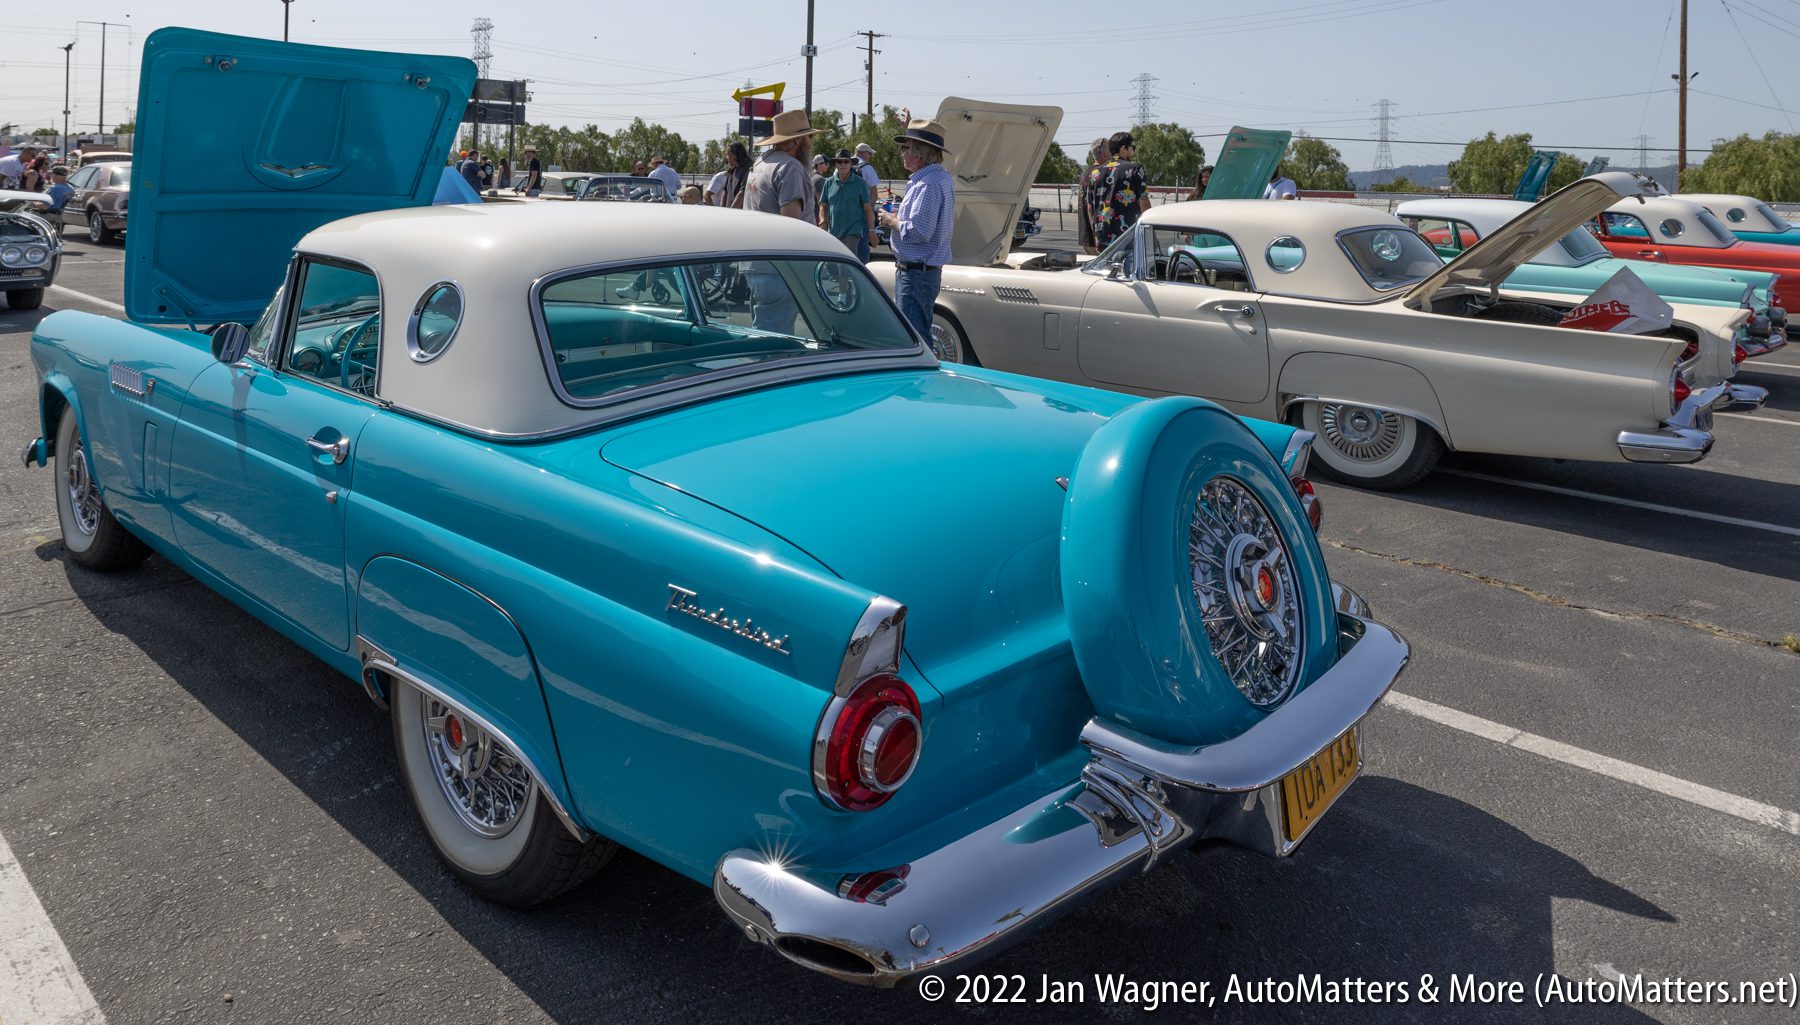 02058-20220424 Fabulous Fords Forever car show &amp; drifting demos-Irwindale Speedway CA-stills &amp; videos-R3-15-35mm